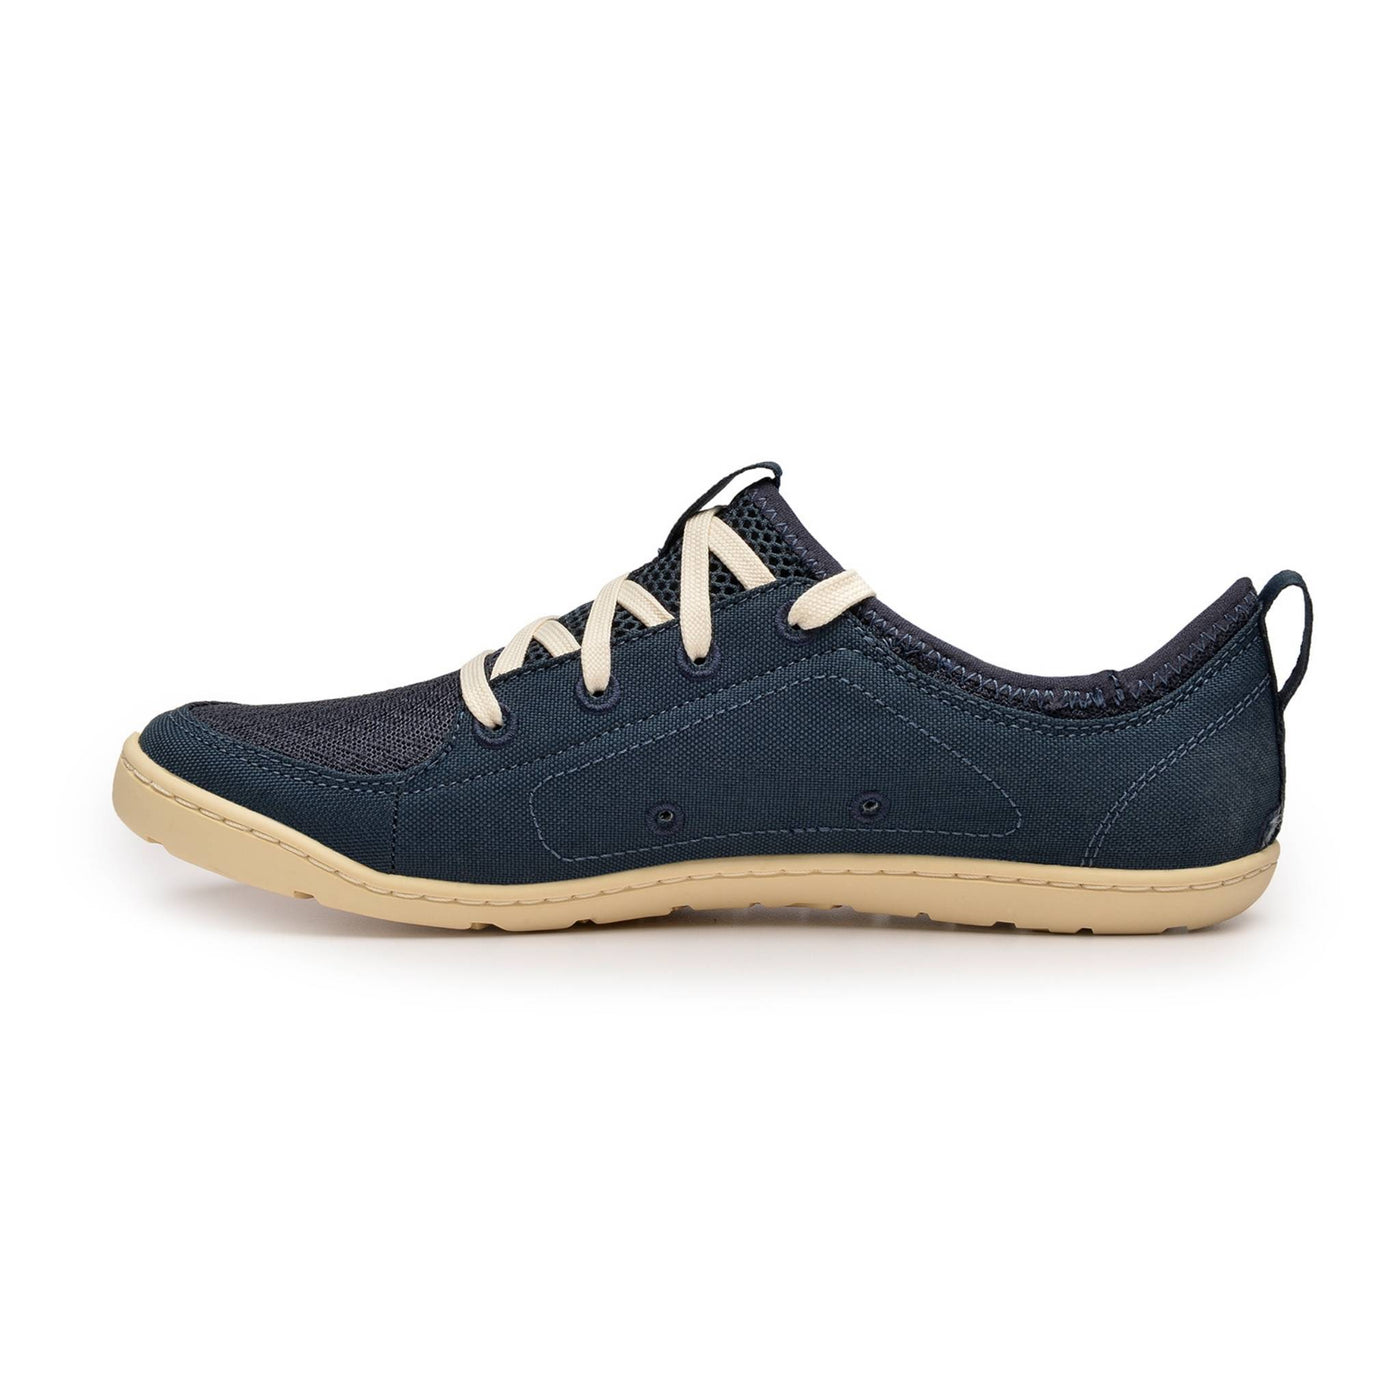 Astral Loyak Womens Shoe | Astral NZ | River and Boat Shoe | Further Faster Christchurch NZ #navy-white